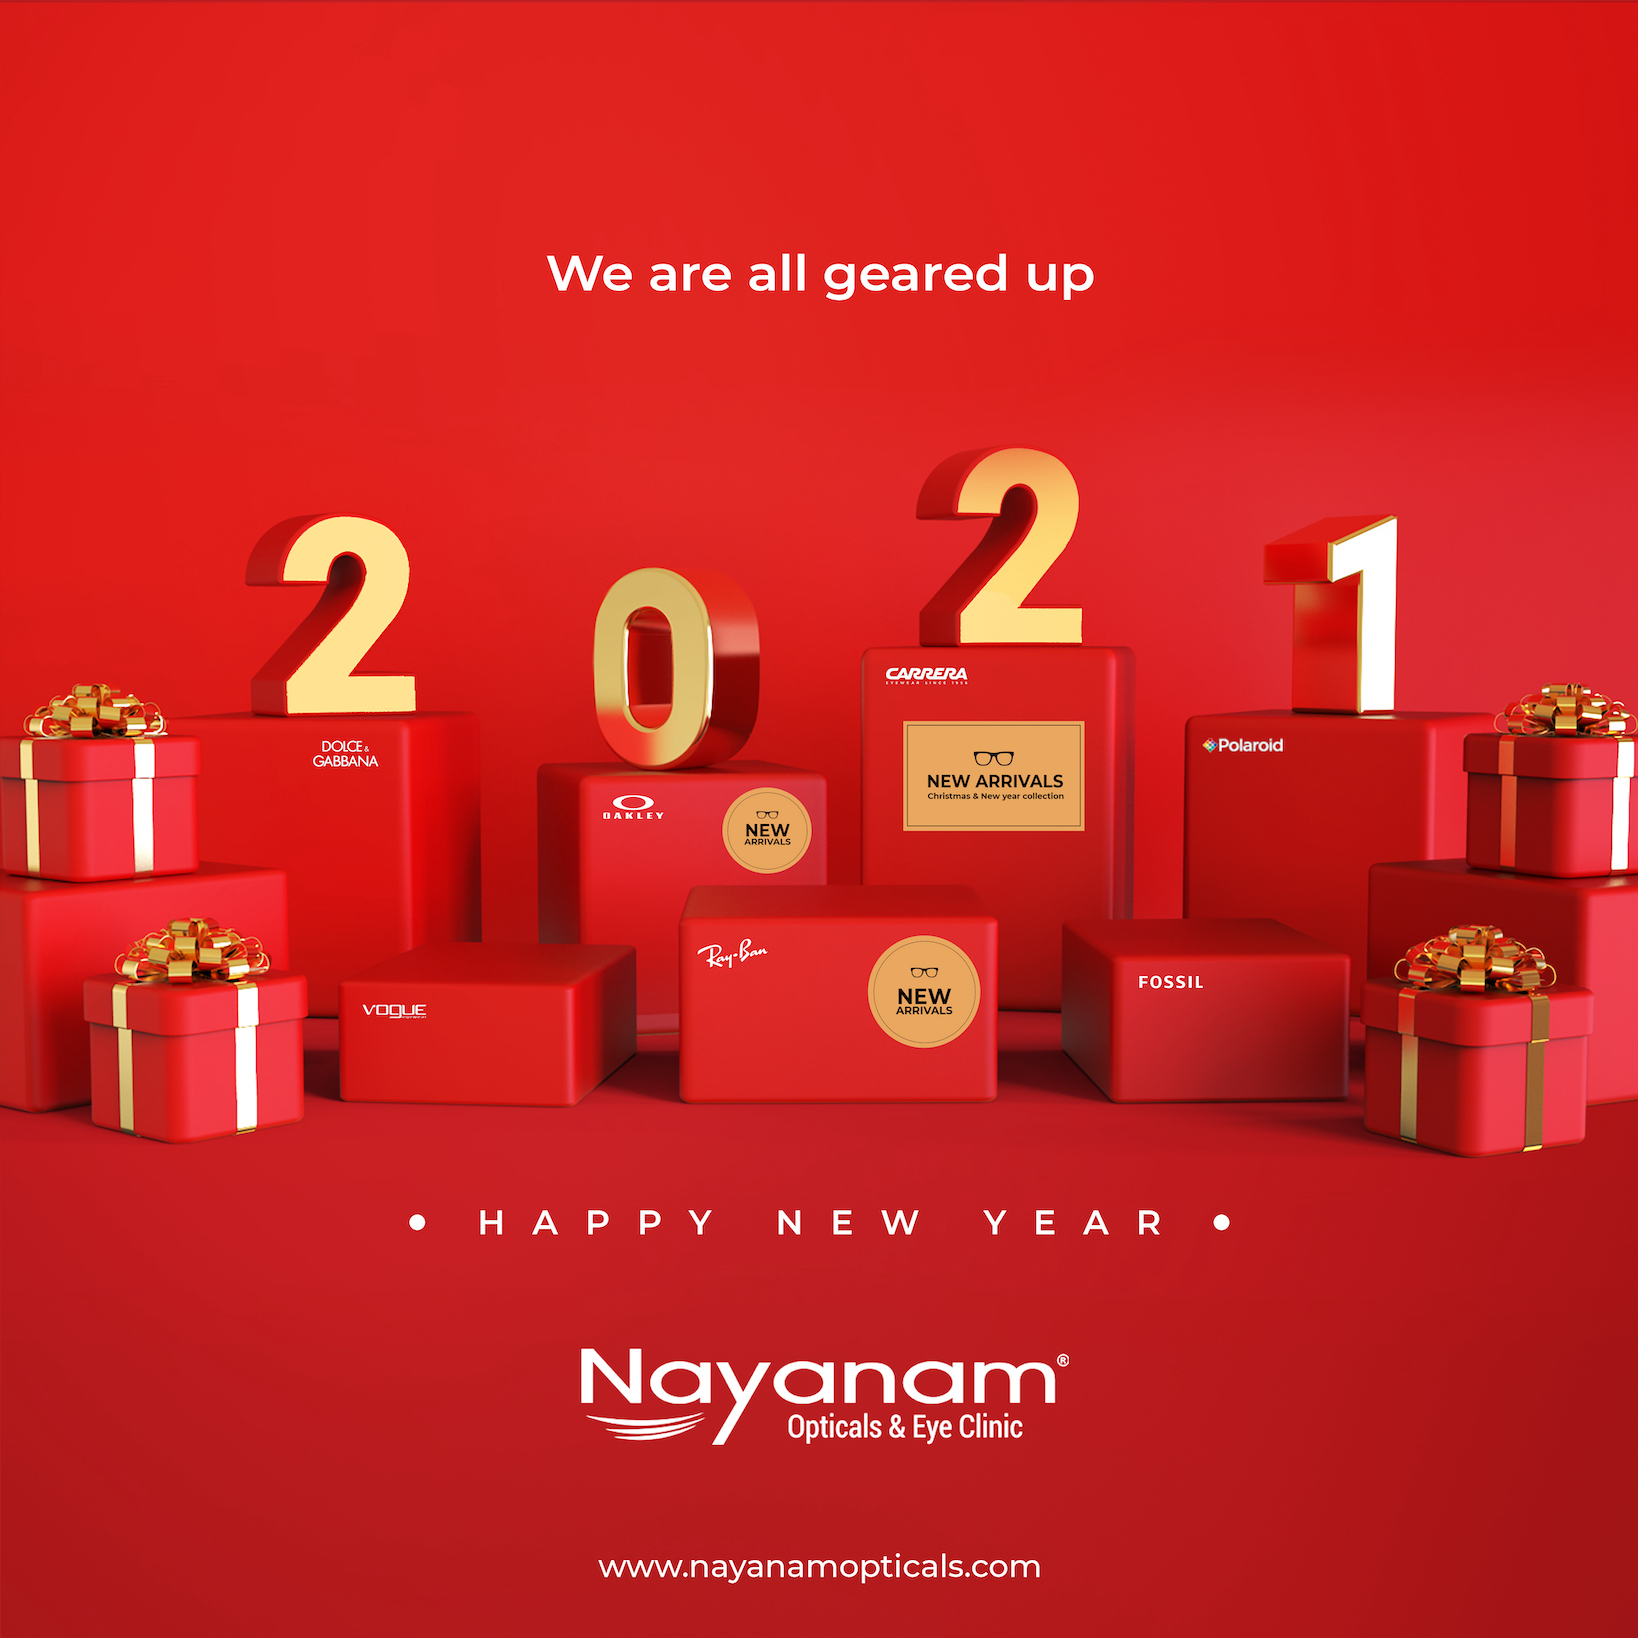 New Year Wishes From Nayanam Opticals & Team